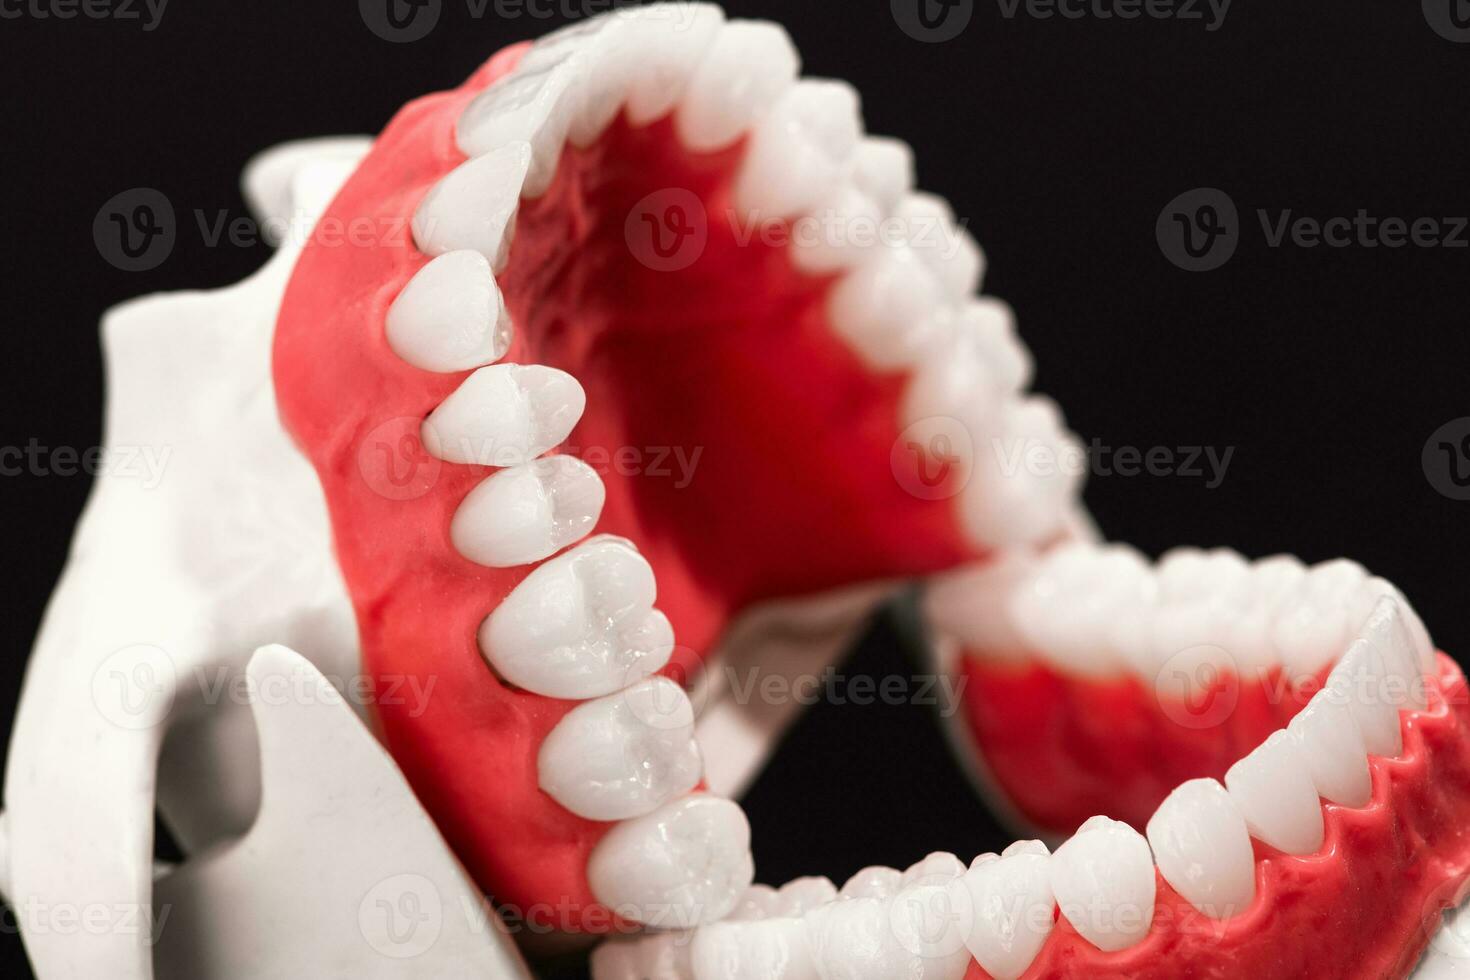 Human jaw with teeth and gums anatomy model isolated on black background. Opened jaw position. Healthy teeth, dental care, and orthodontic medical healthcare concept. photo